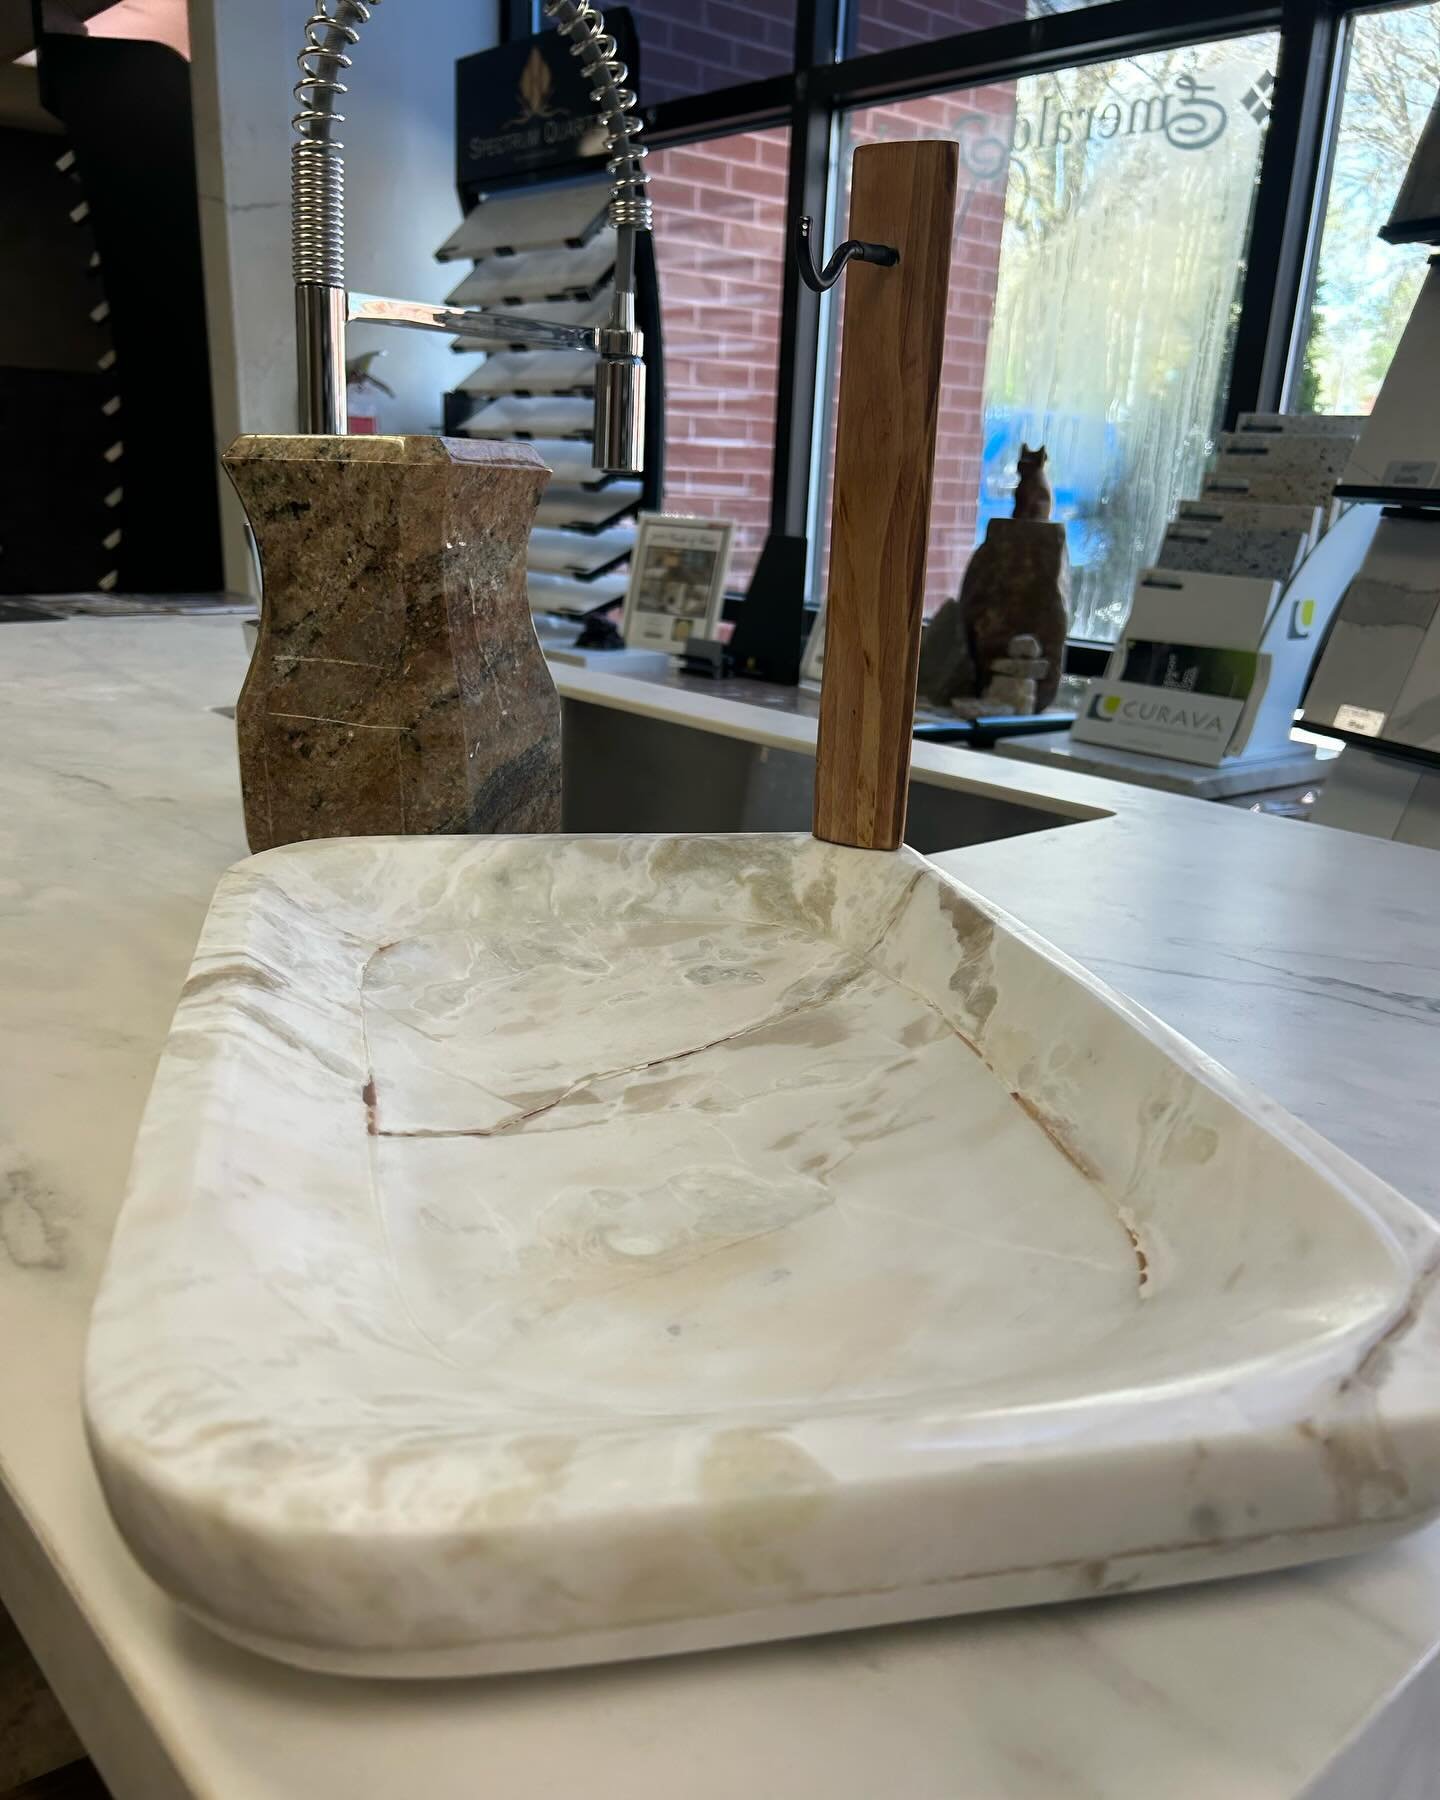 April so far! Let&rsquo;s see what the rest of the month brings

1. Our artisans made a dish made of Calacatta Borguini #Marble. Come and ask what else they can #handmake

2. Wrapping up on this *amazing* and unique #masterbathroom. #Porcelain #vanit